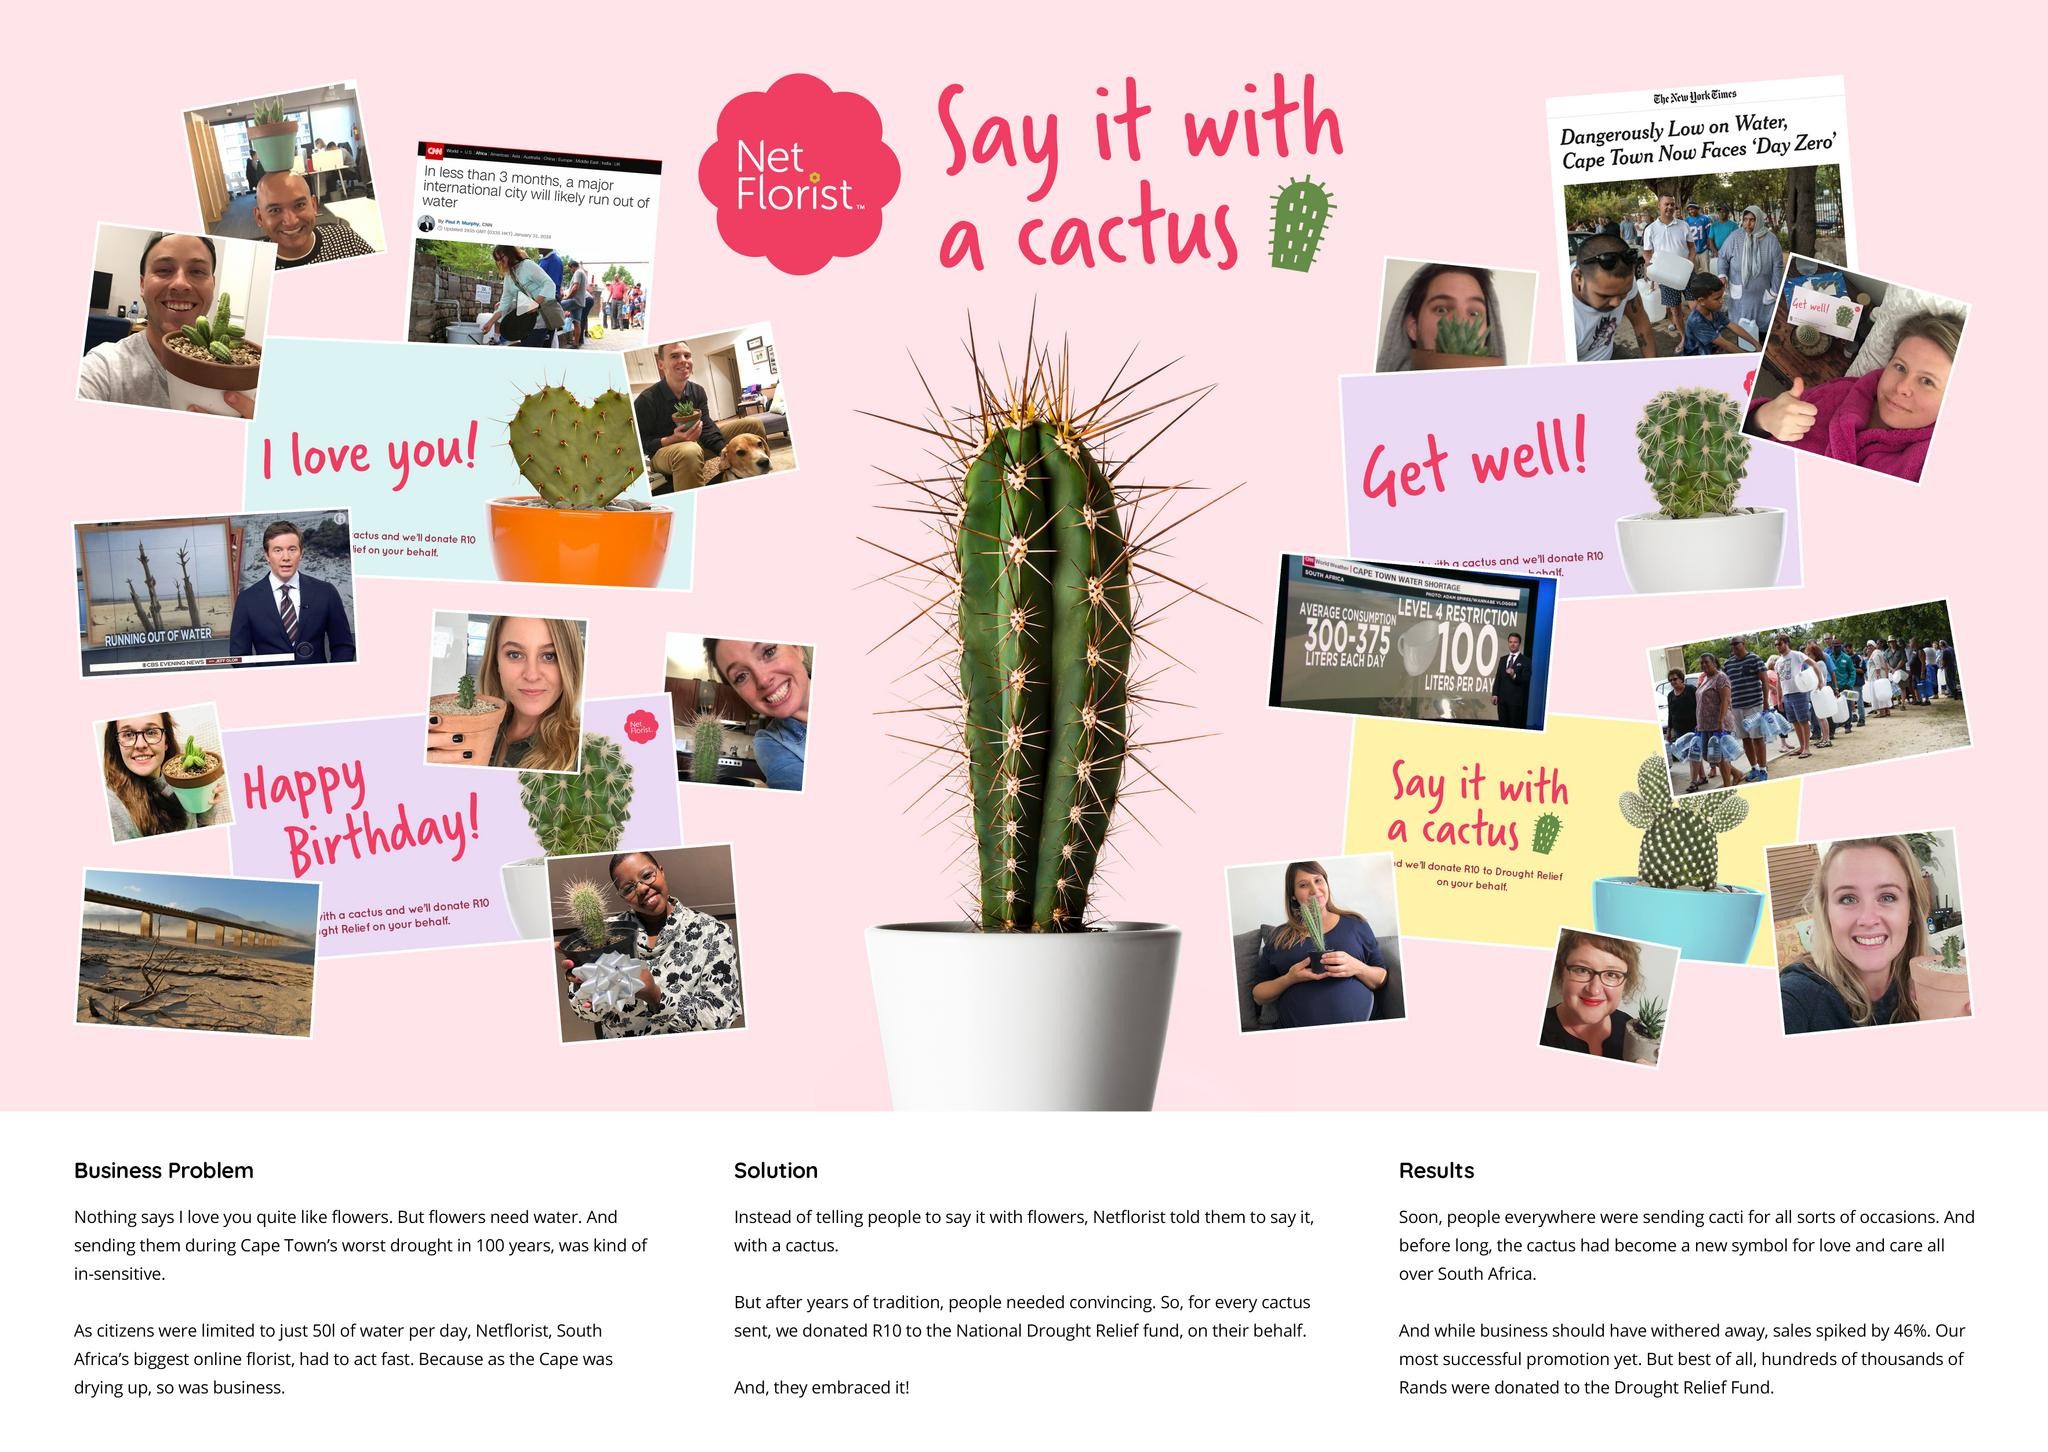 Say it with a cactus